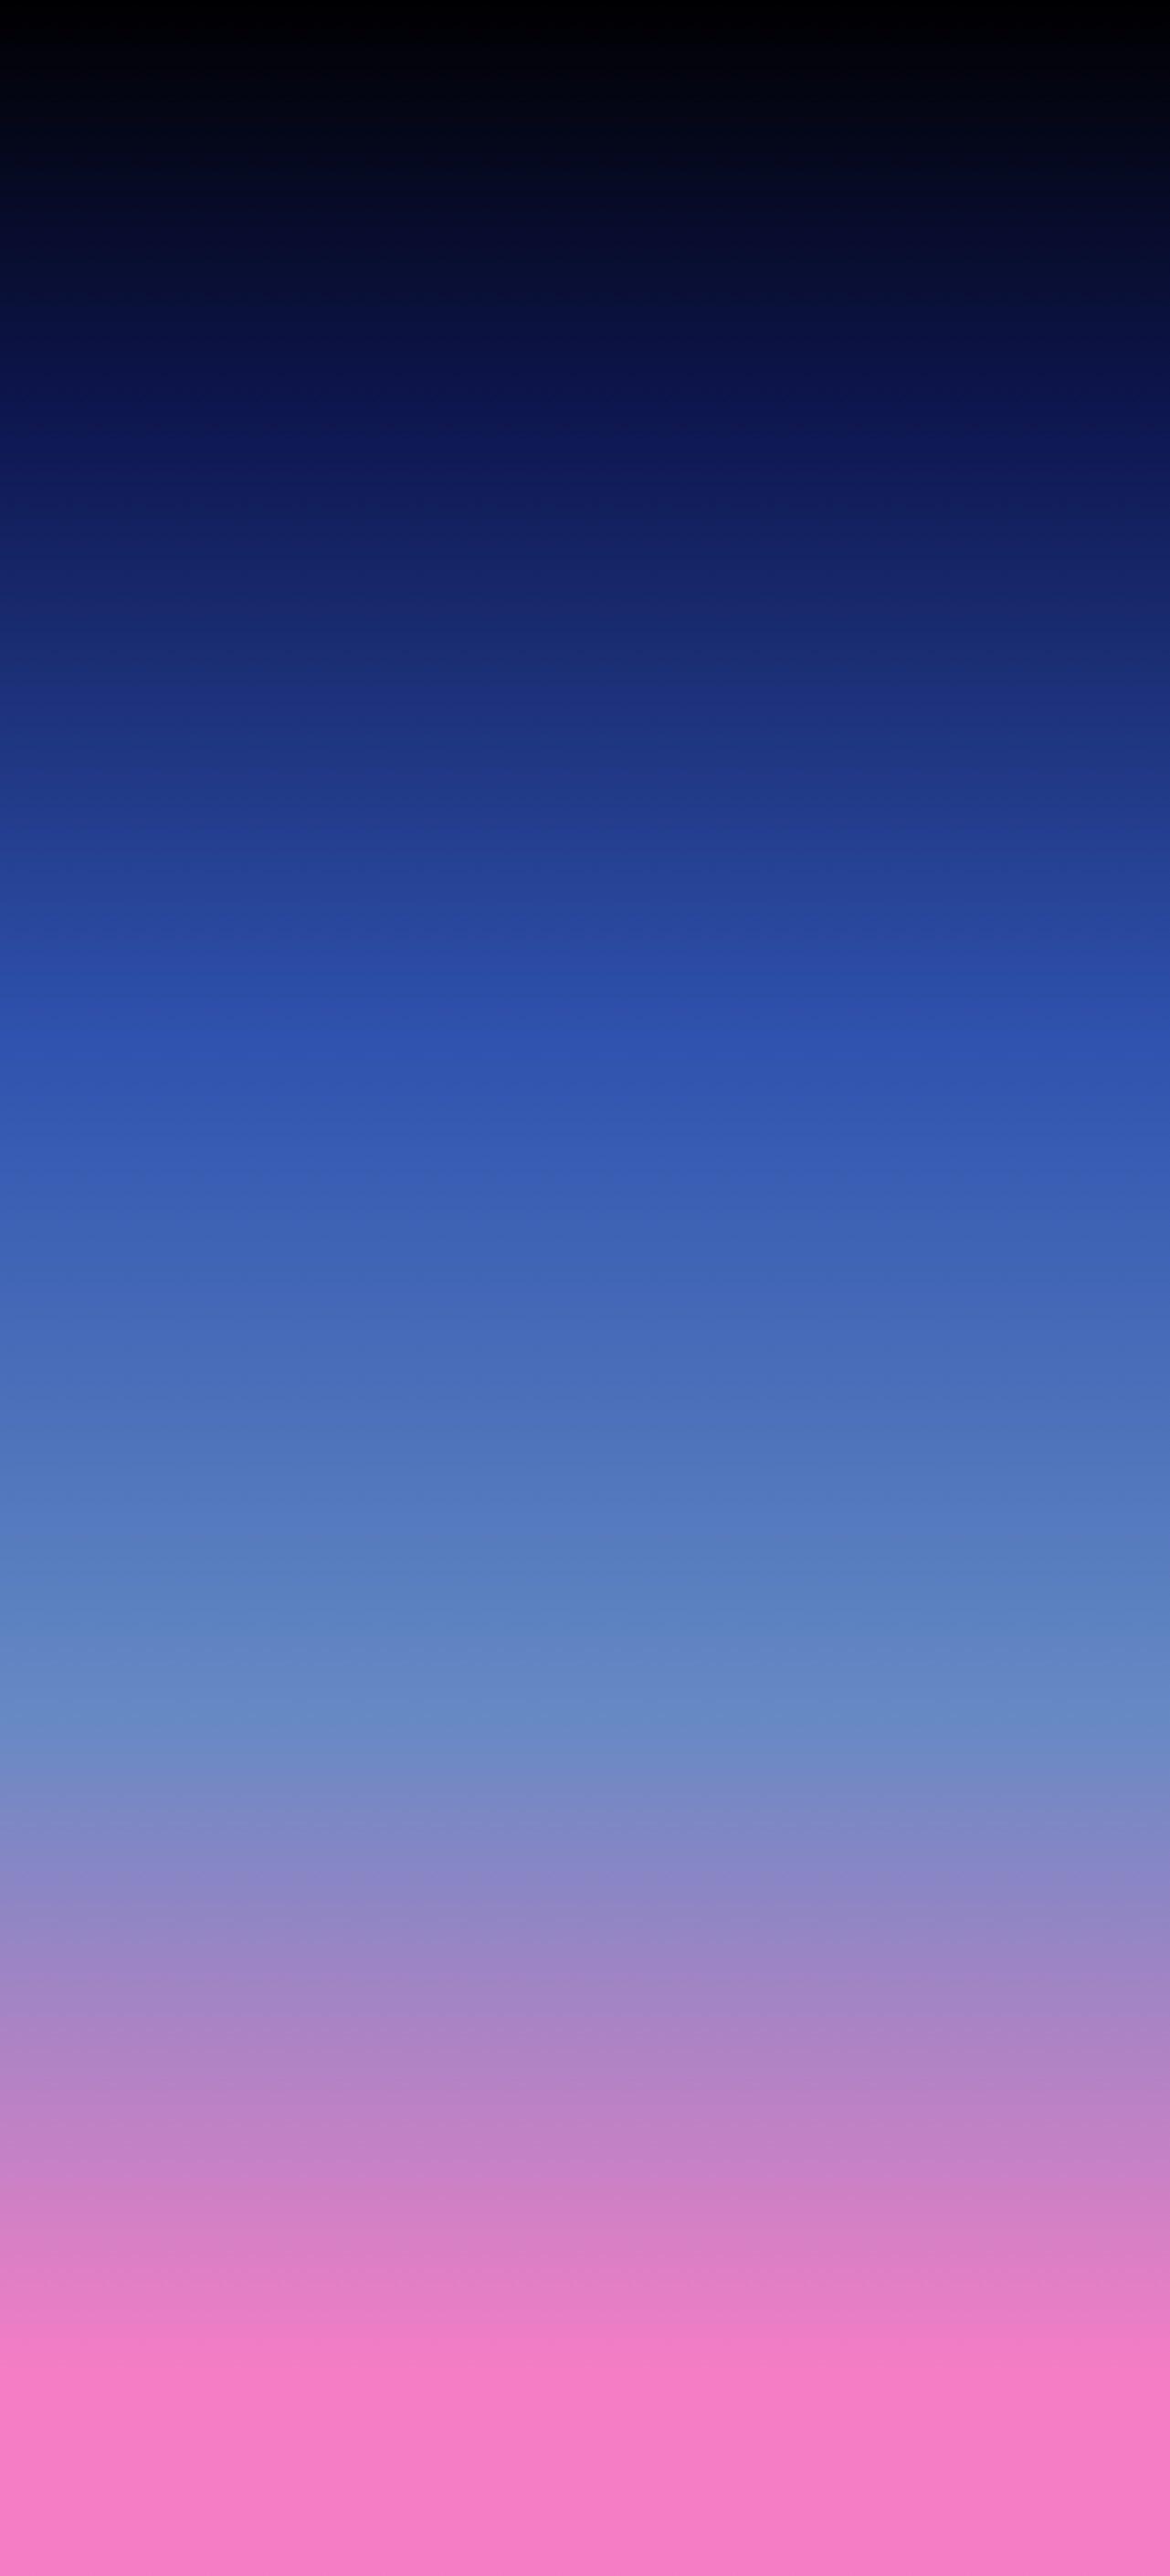 A homemade, luminous dock, notchless, wallpapers for Home screen. Enjoy